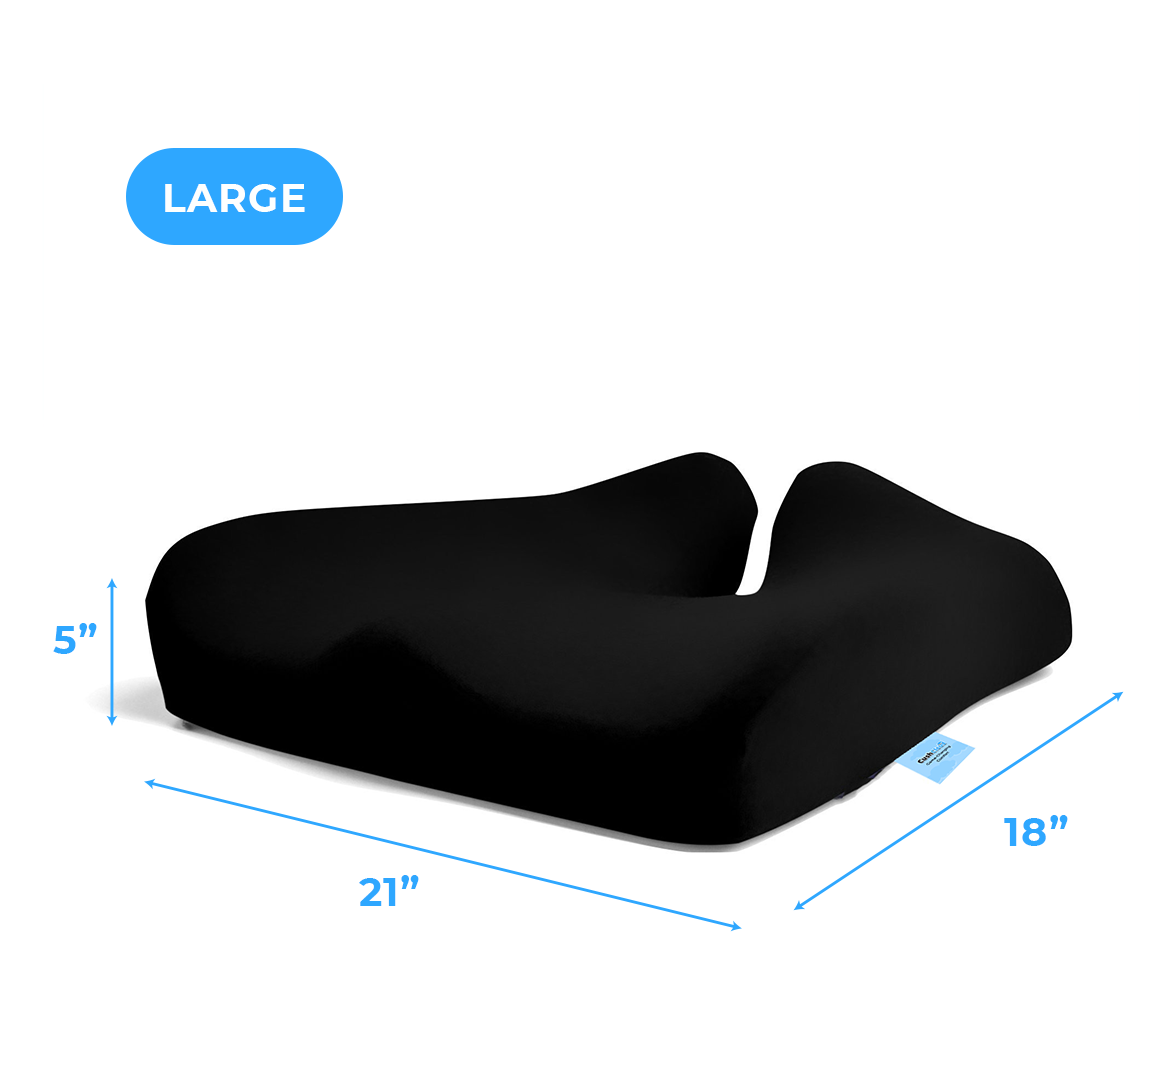 Pure Posture Seat Cushion, Back Pad Support Instantly Relieves Pain &  Pressure - BLACK Market